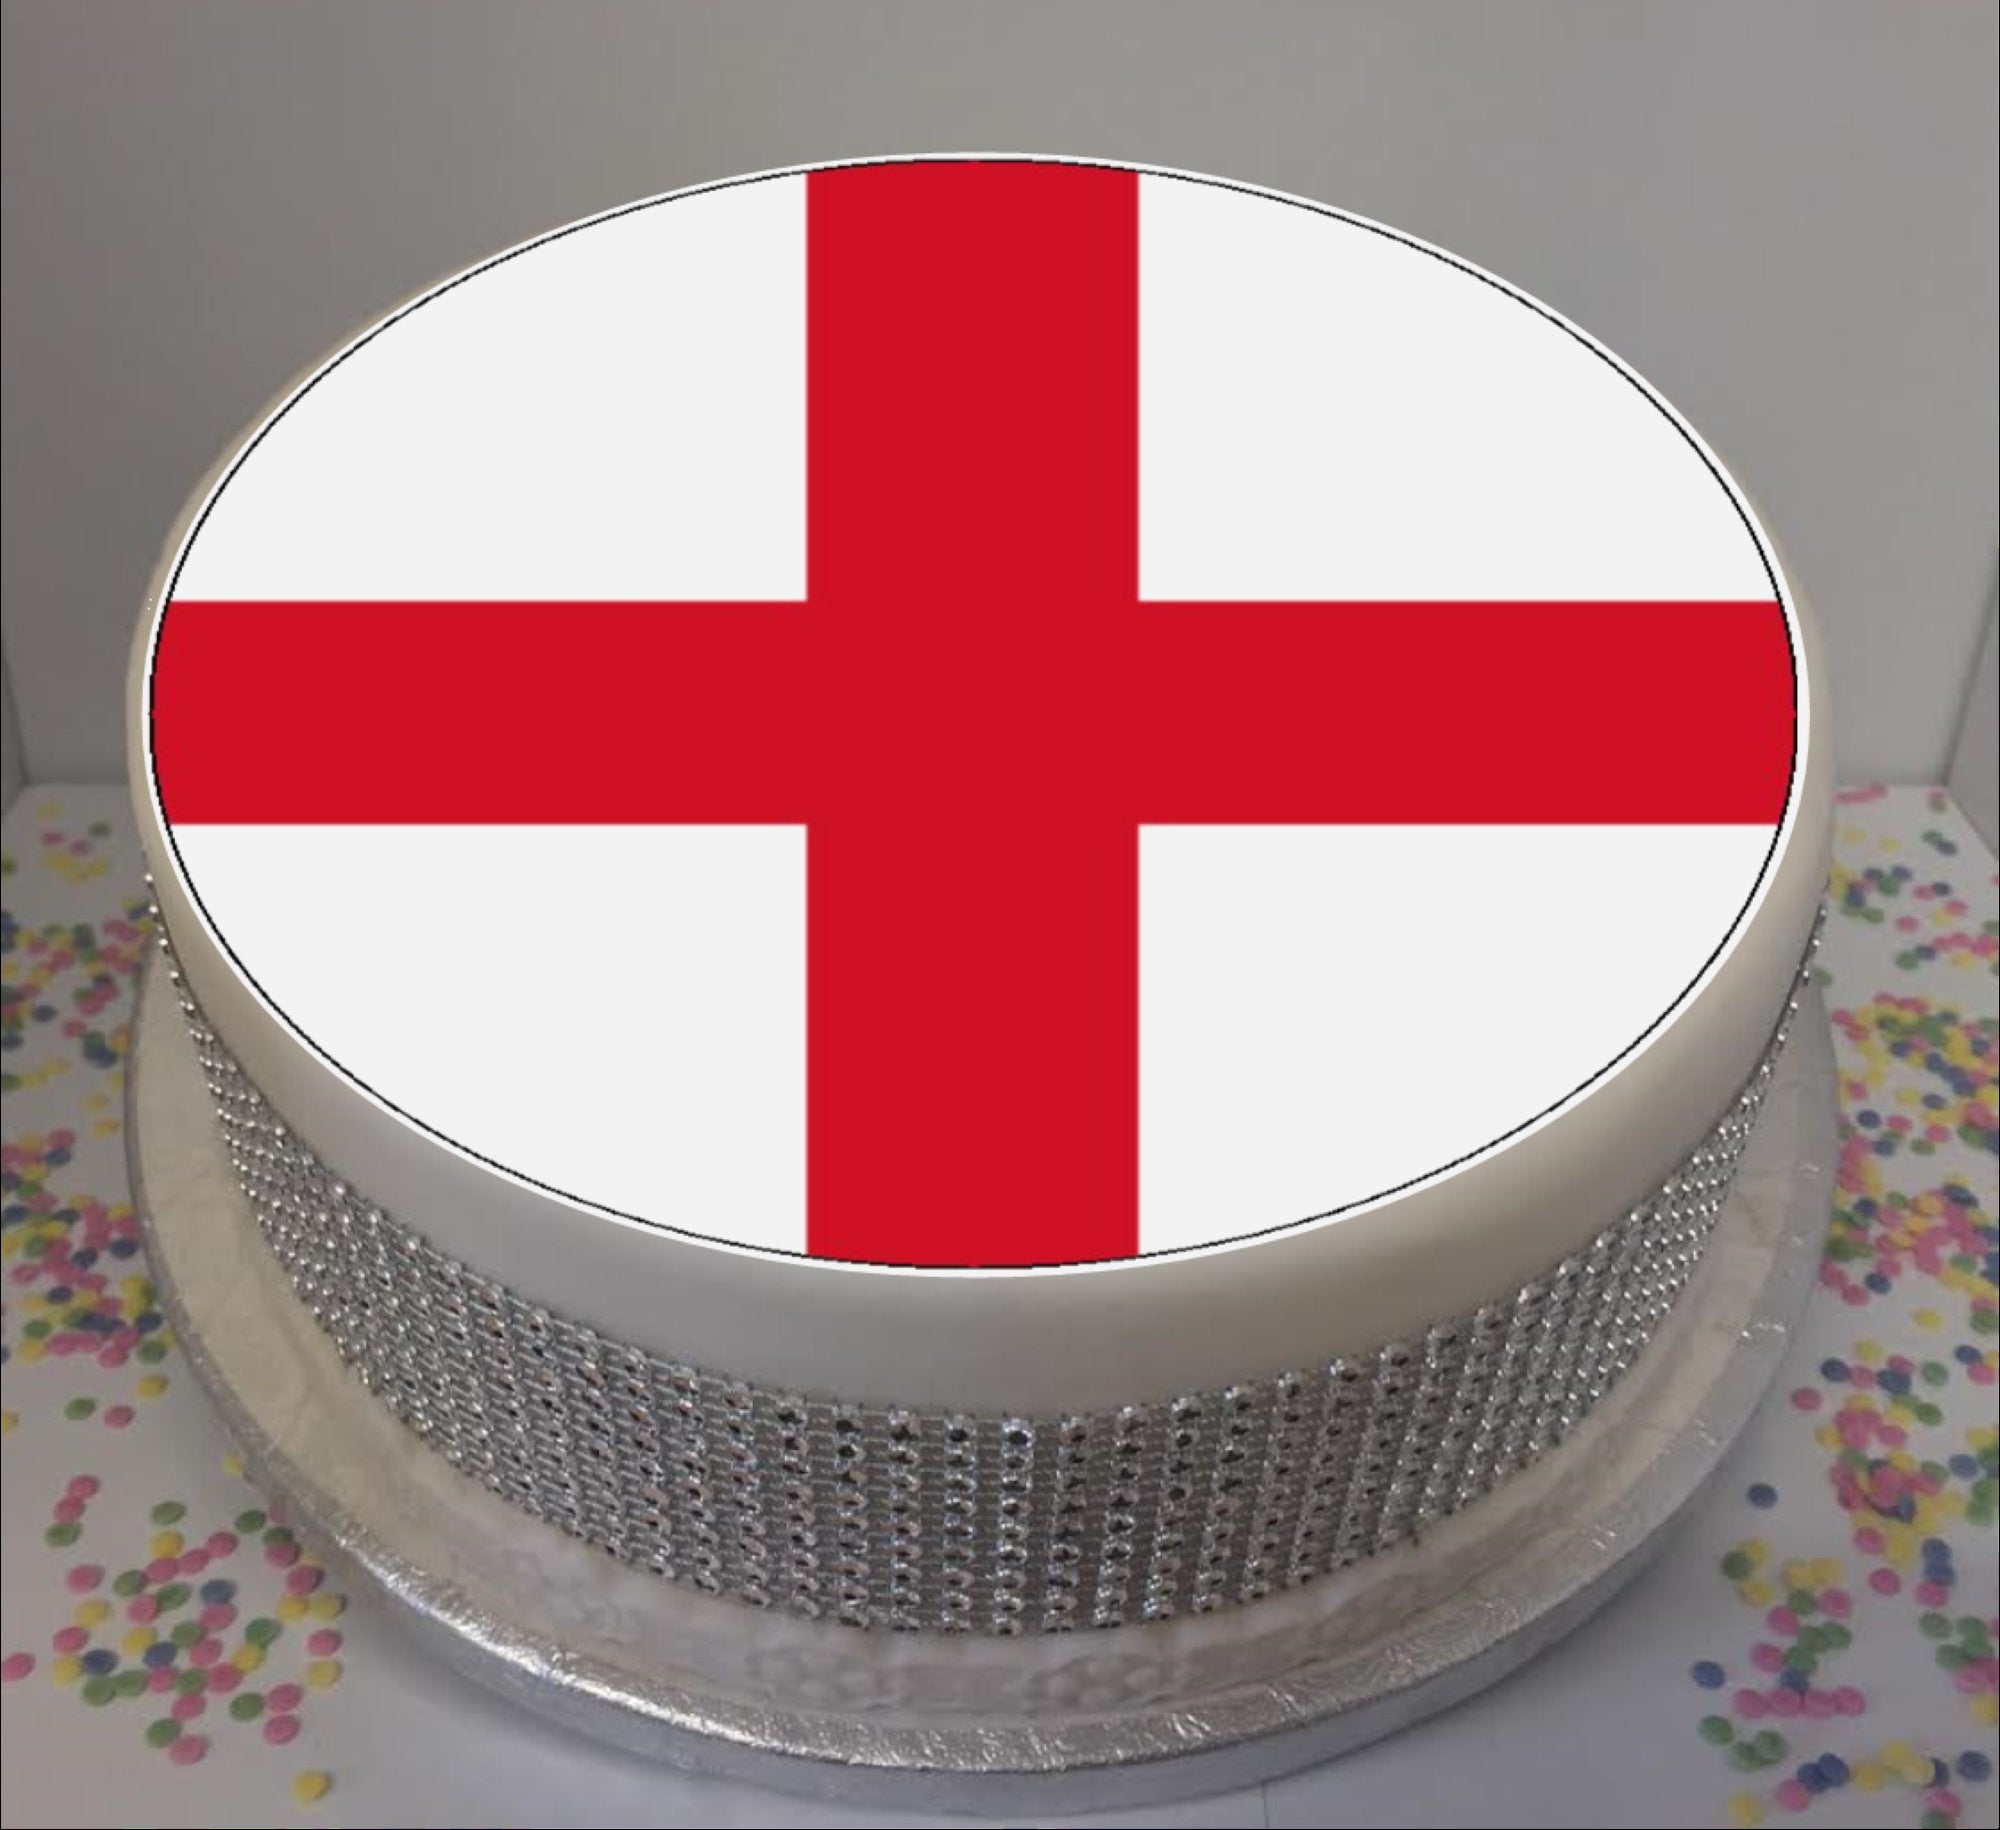 UK Celebration Cake With Flags, Marshmallow And Candy Decorations On A Red  Cake Stand On A White Table Against A Blue Background. Stock Photo, Picture  and Royalty Free Image. Image 59202887.